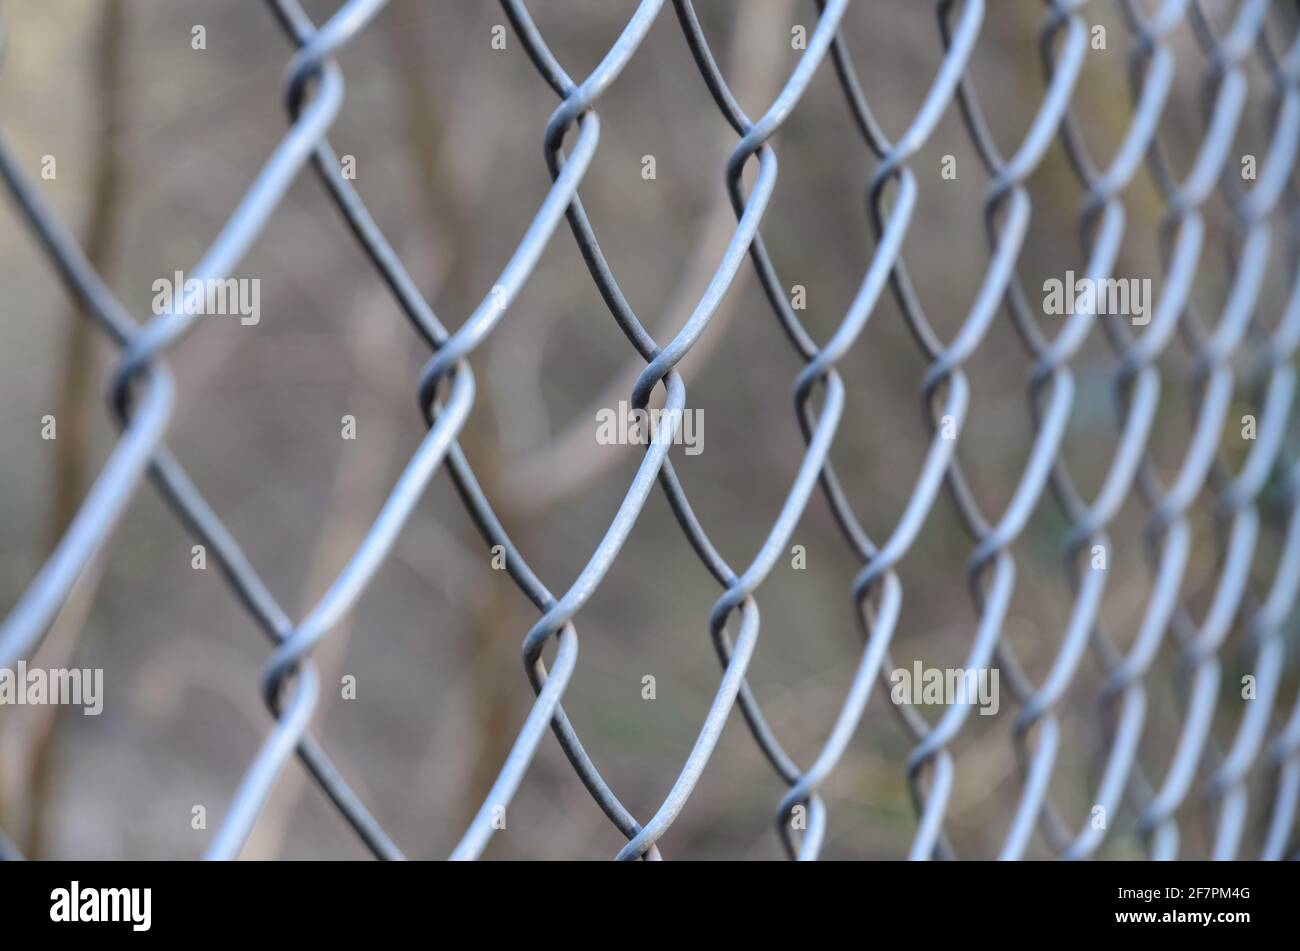 Close-up of metal chain-link fence, diamond pattern, with shallow depth of field or selective focus, abstract background or backdrop Stock Photo